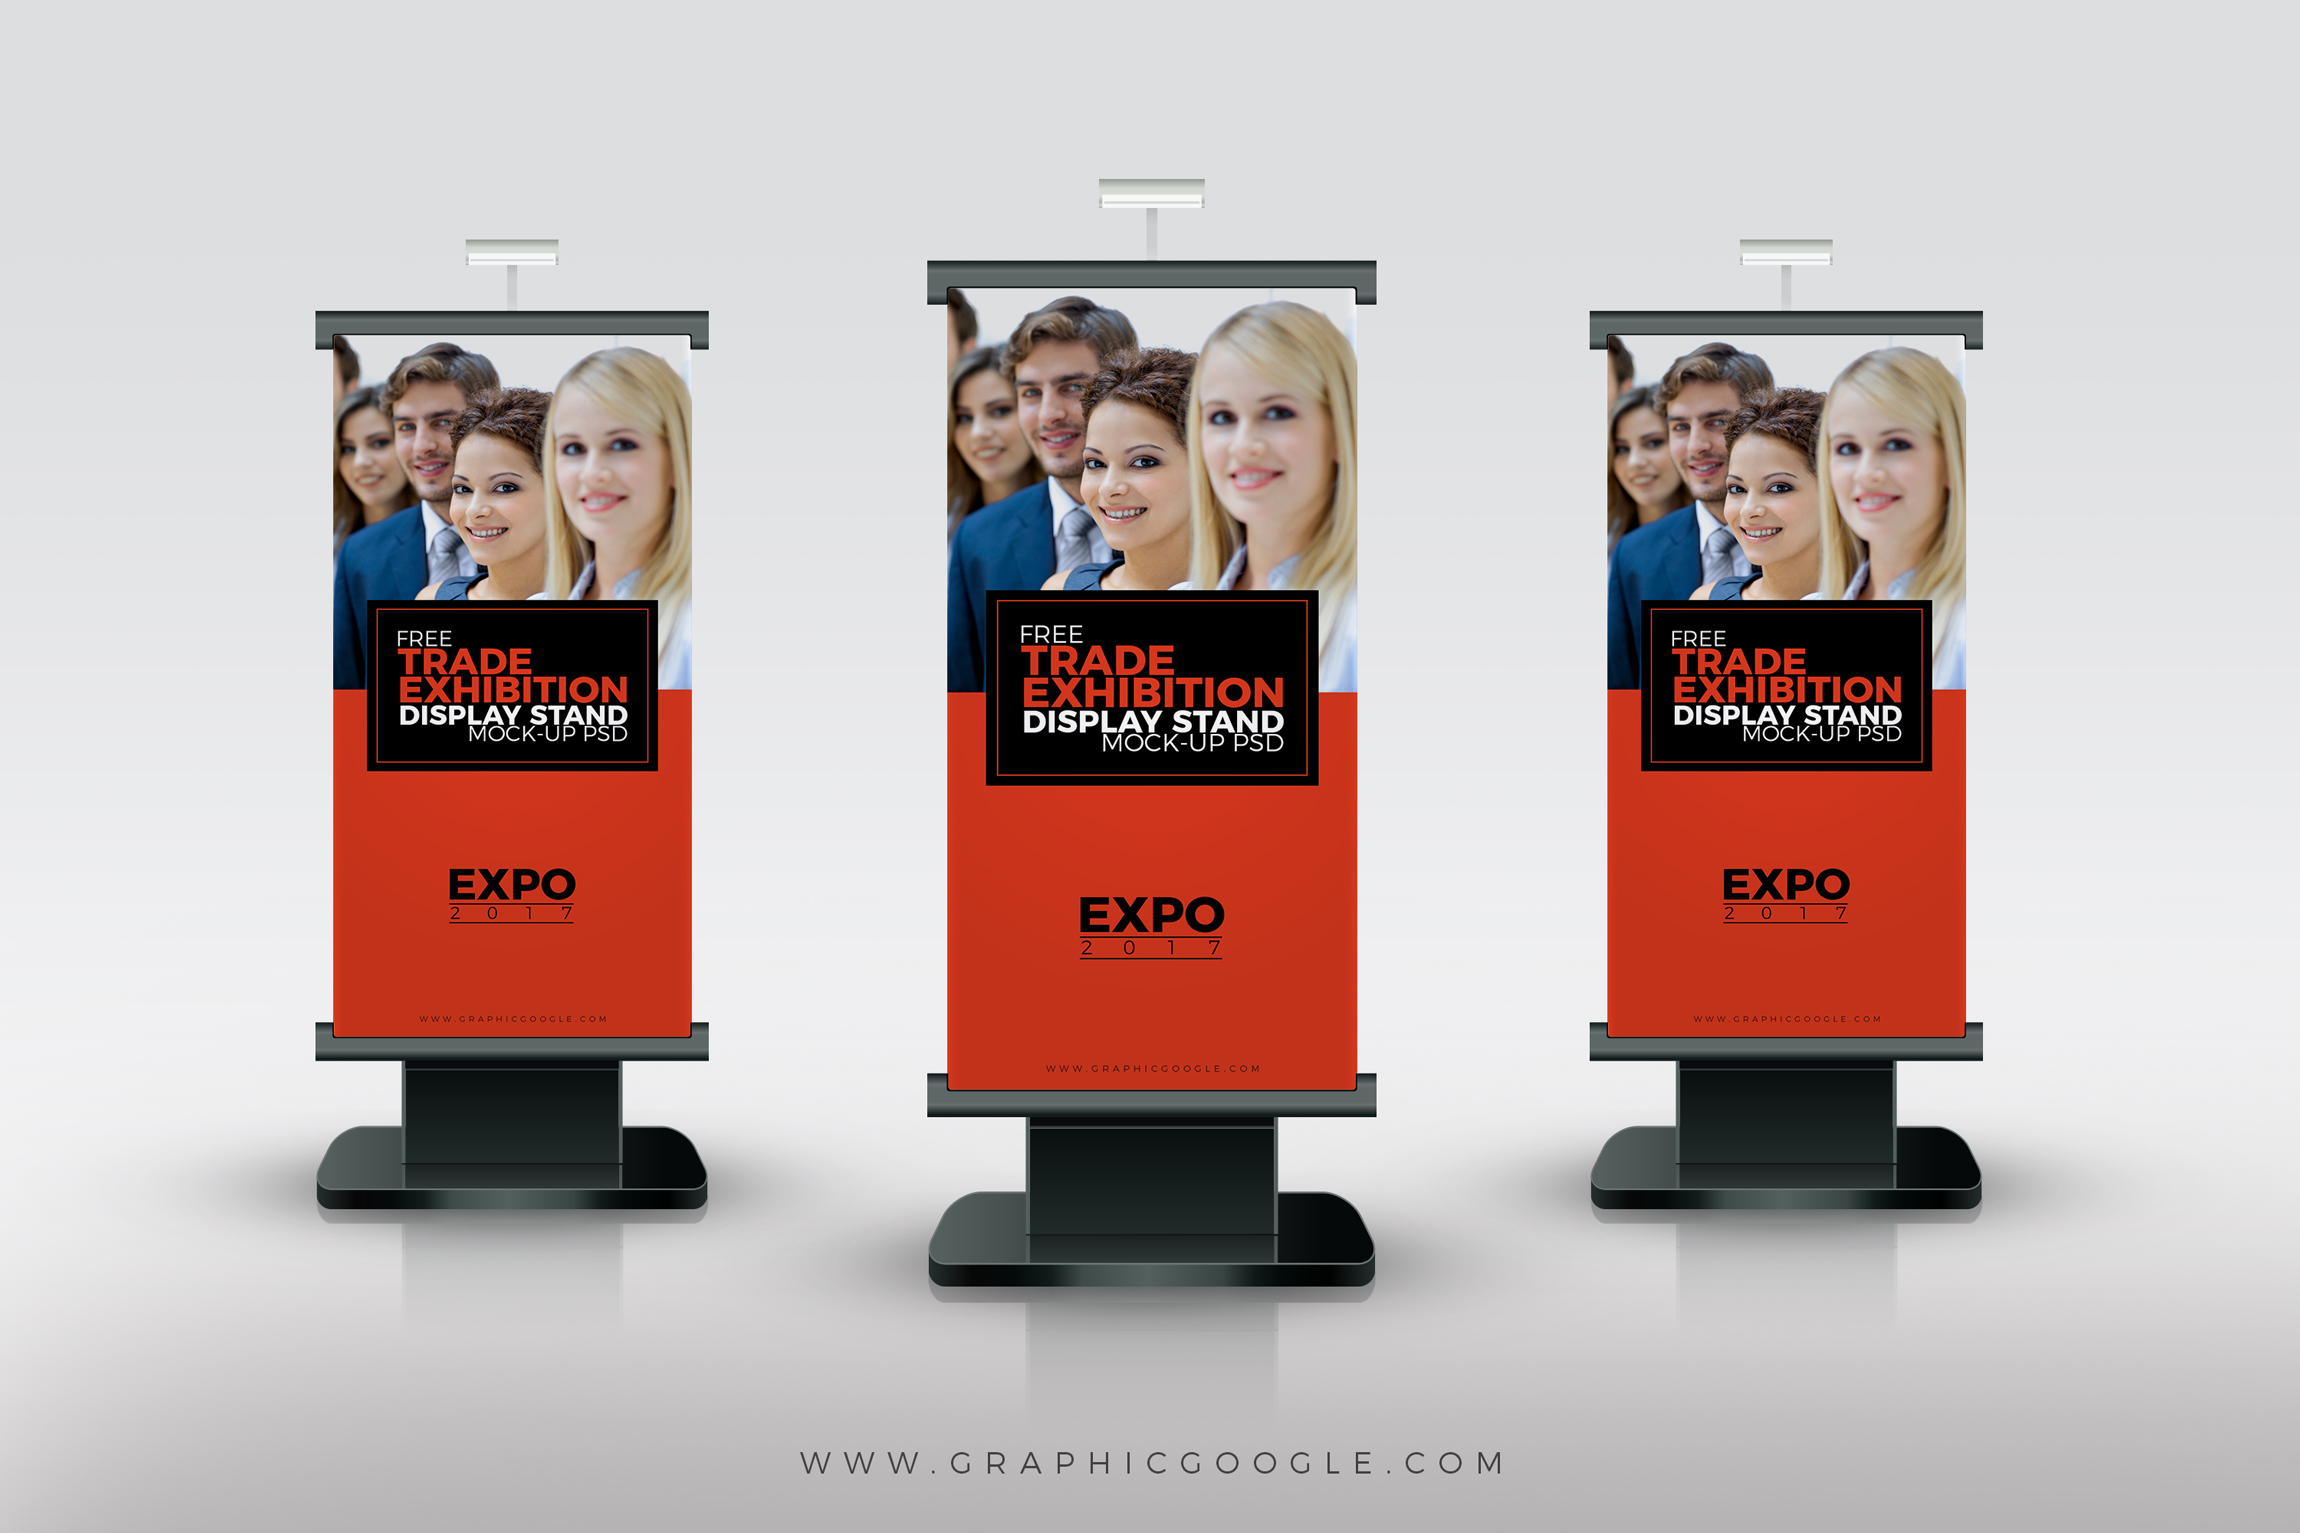 Download Free Trade Exhibition Display Stand Mock Up Psdgraphic Google Tasty Graphic Designs Collection Yellowimages Mockups